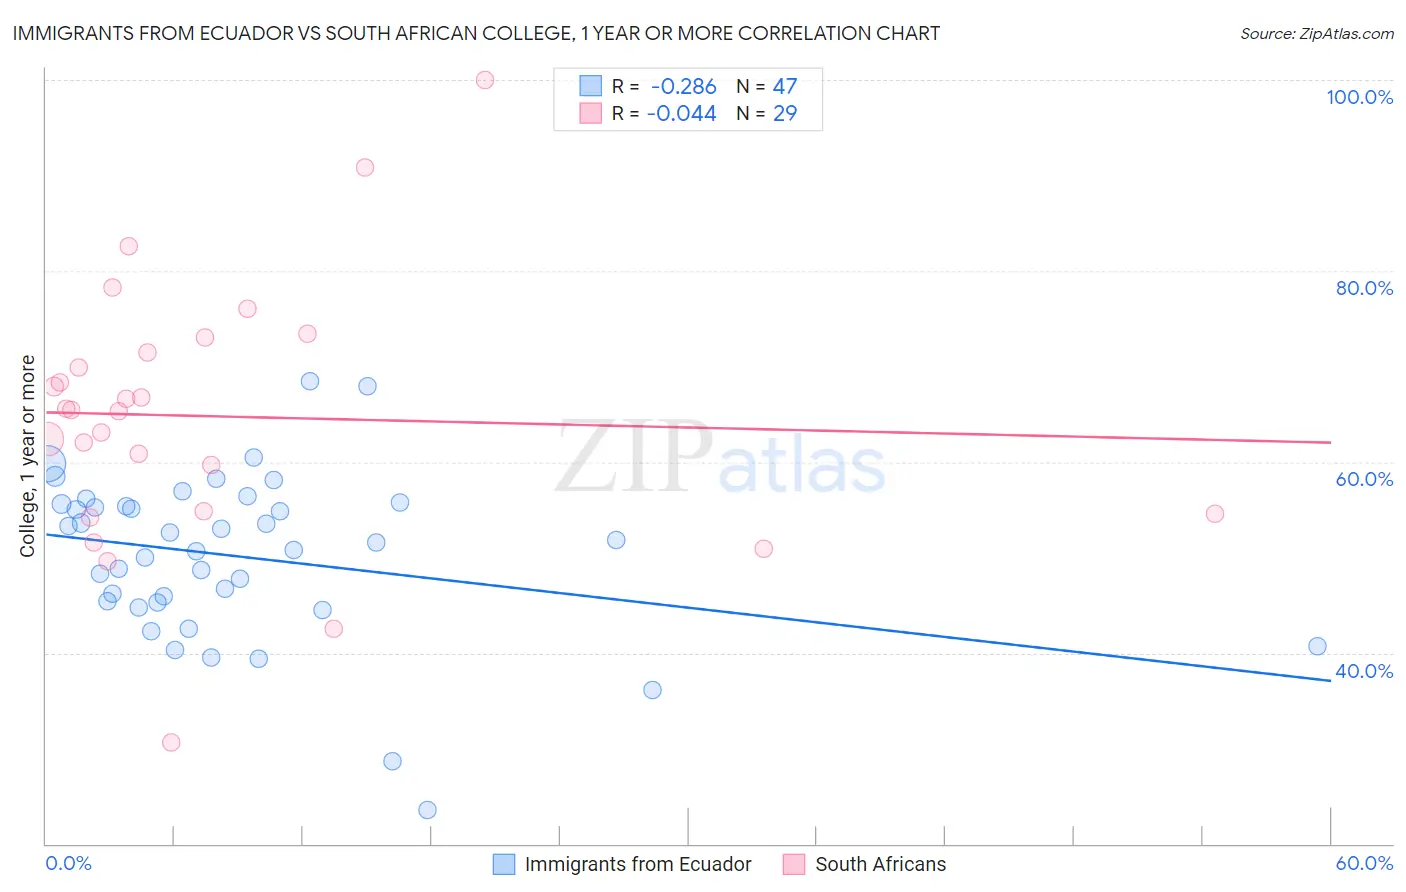 Immigrants from Ecuador vs South African College, 1 year or more